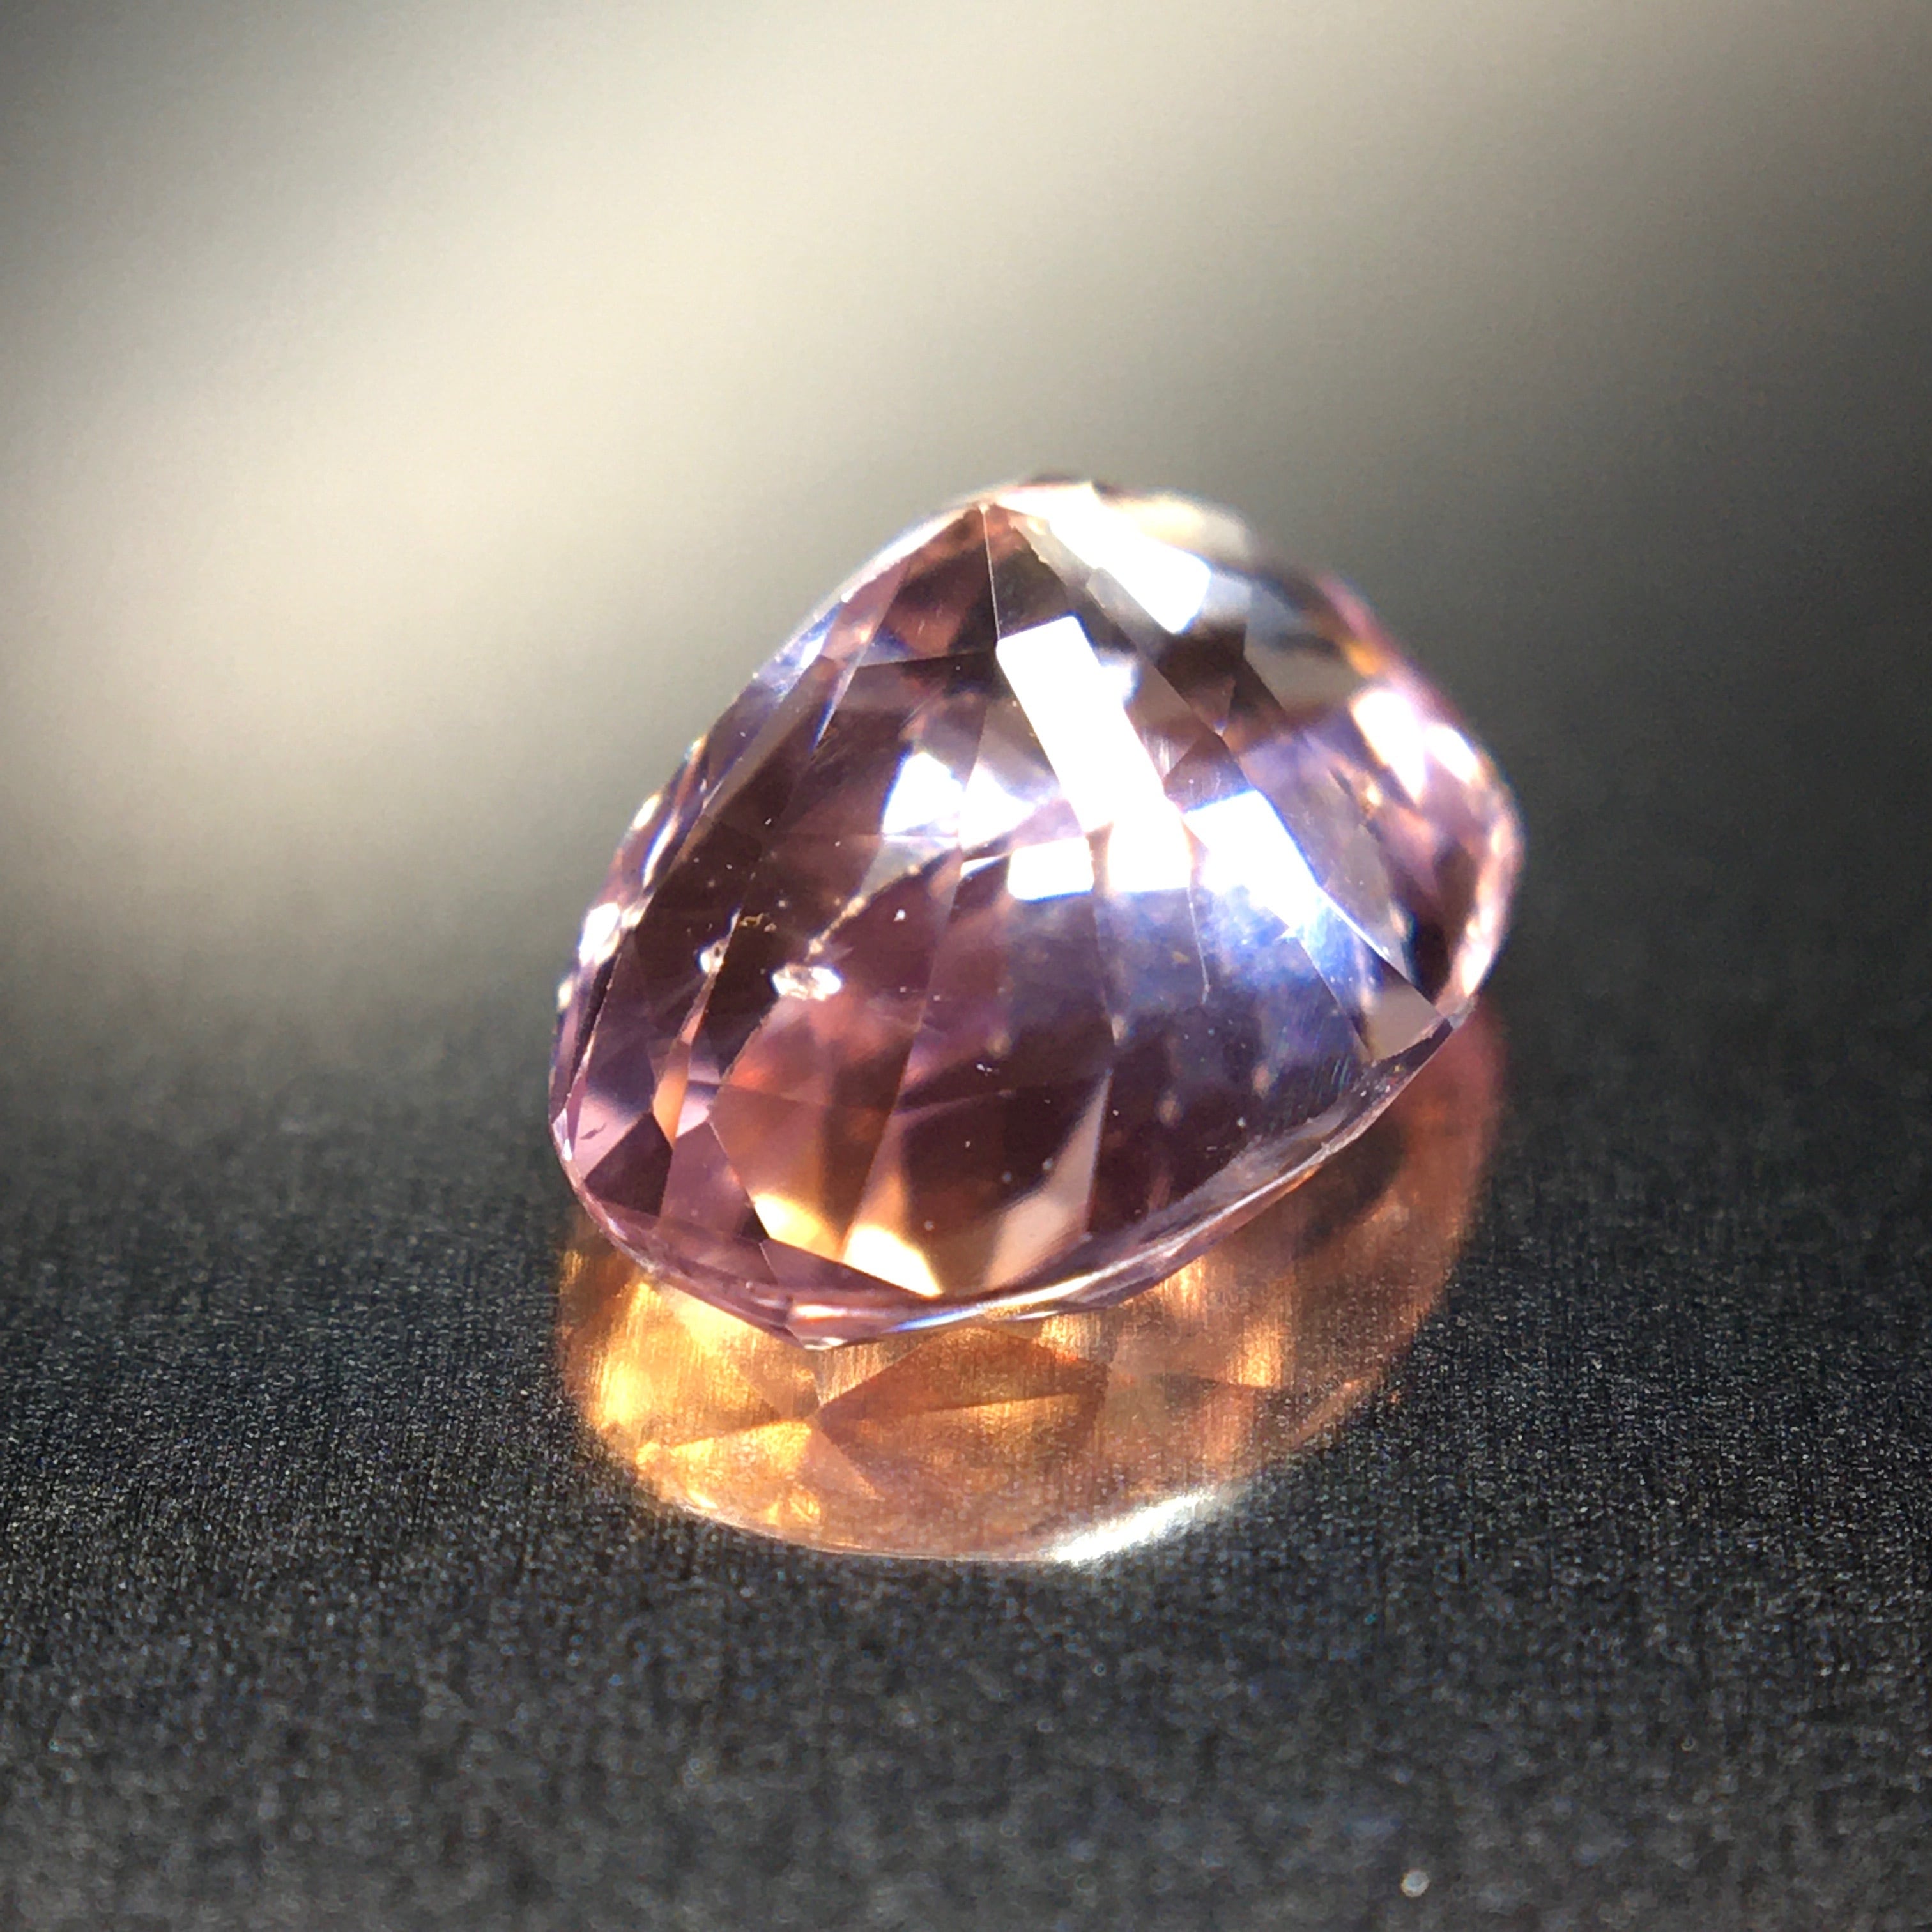 1.4ct UP オレンジとピンクの”凛”とした輝き 天然 非加熱 パパラチァサファイア | Frederick’s Gems&Jewelry  powered by BASE